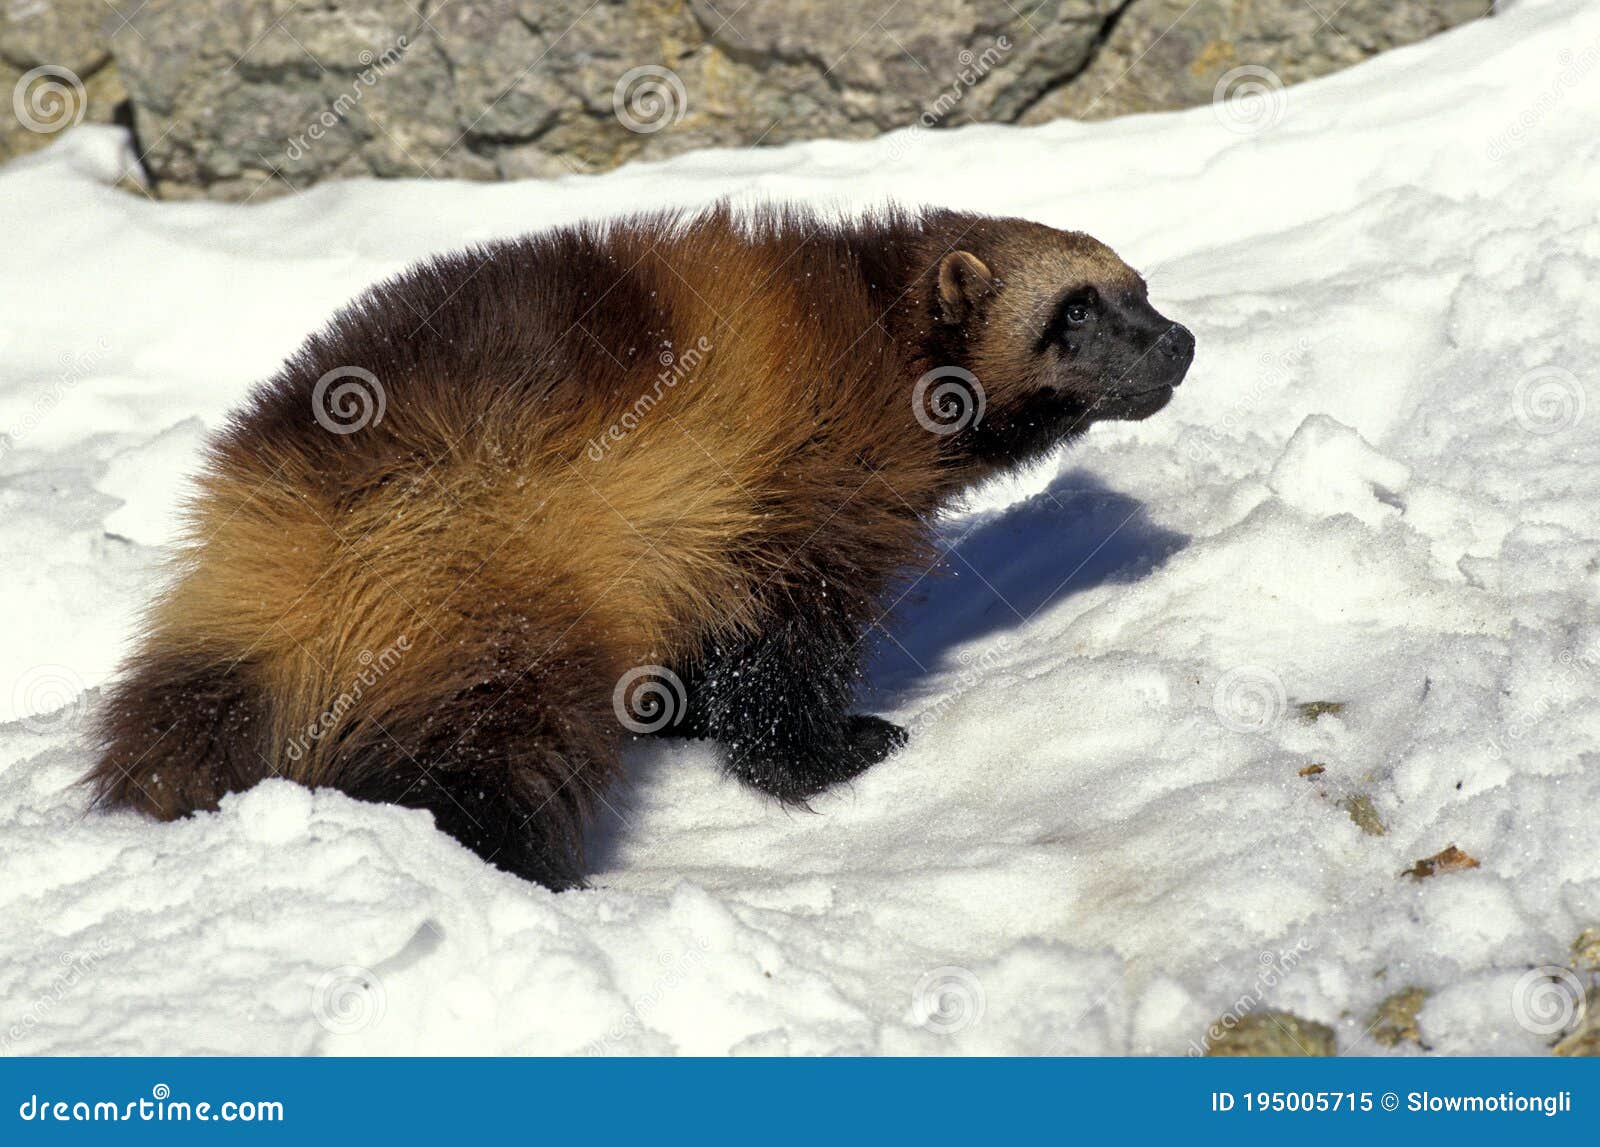 NORTH AMERICAN WOLVERINE Gulo Gulo Luscus, ADULT STANDING on SNOW, CANADA  Stock Image - Image of mammal, animal: 195005715